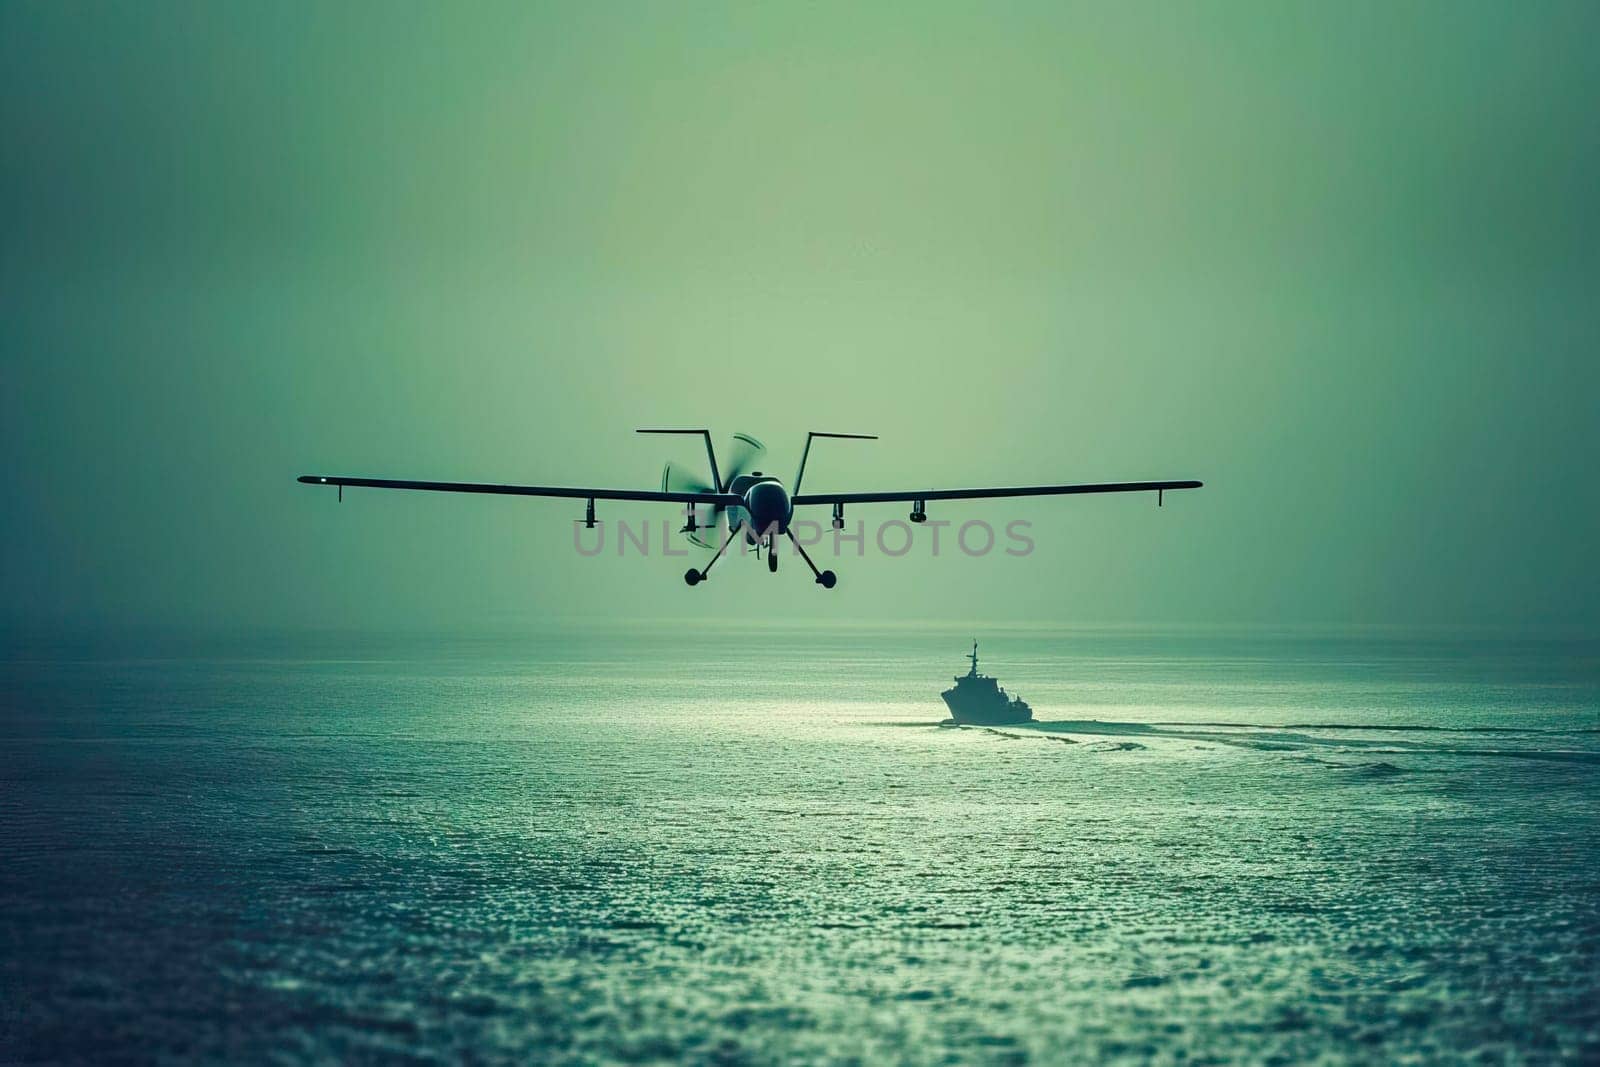 Military unmanned aerial vehicle, flies over a boat sailing in the ocean